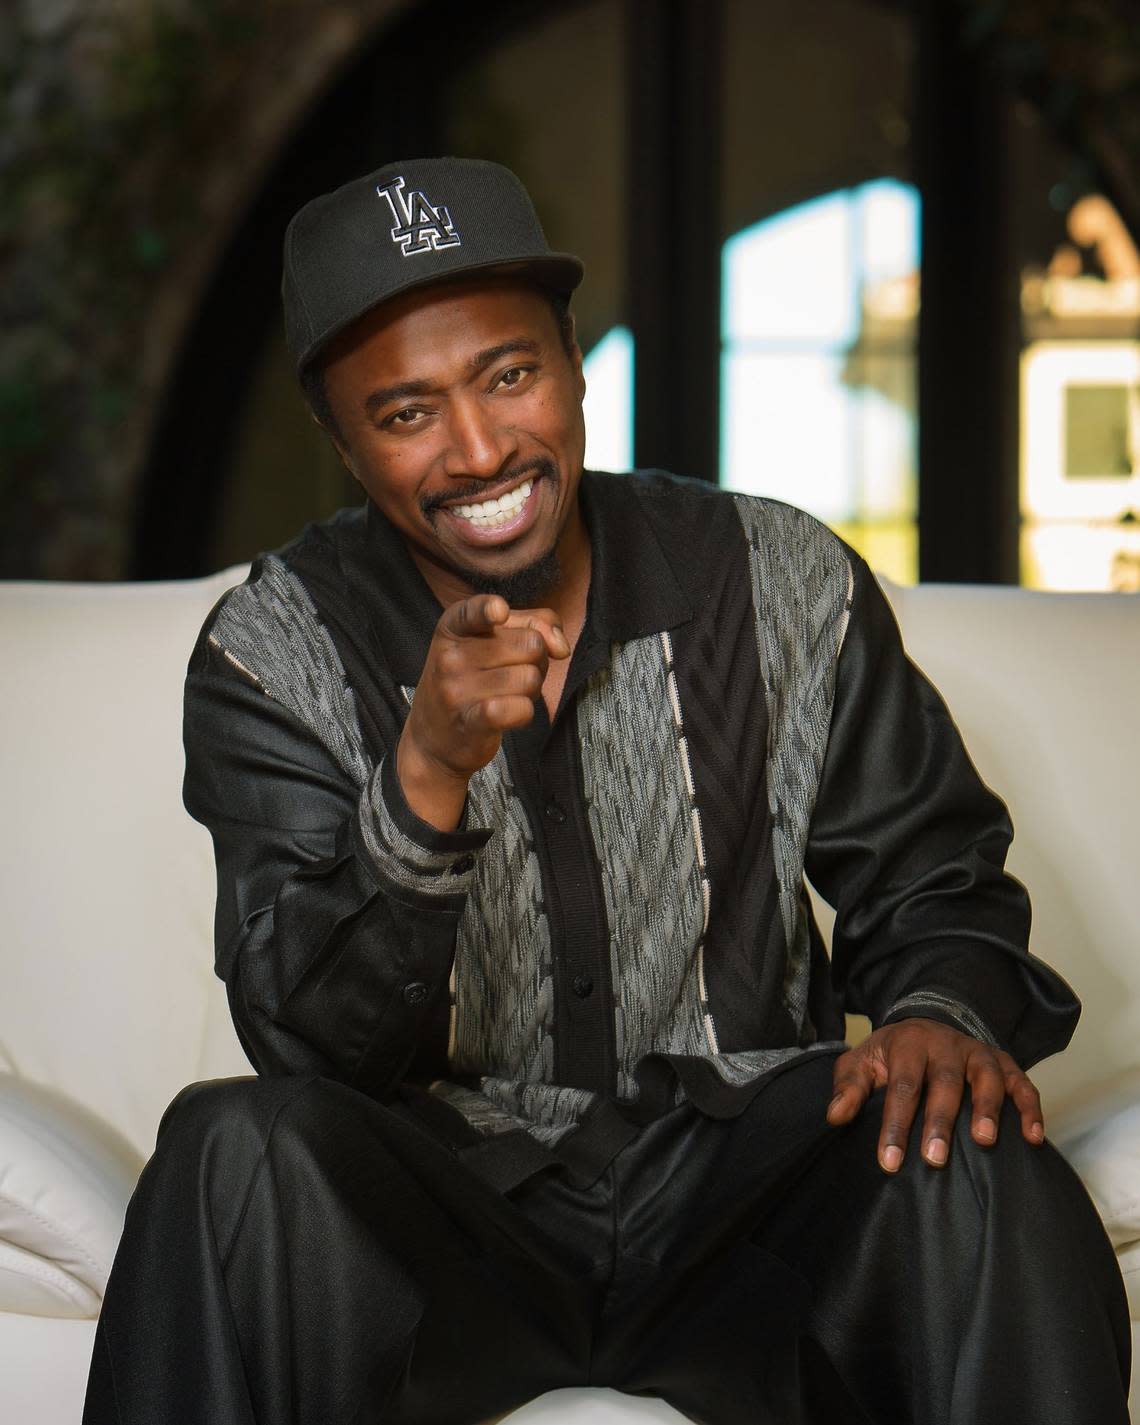 Kansas City native Eddie Griffin will perform his comedy act May 5 at the Uptown Theater.